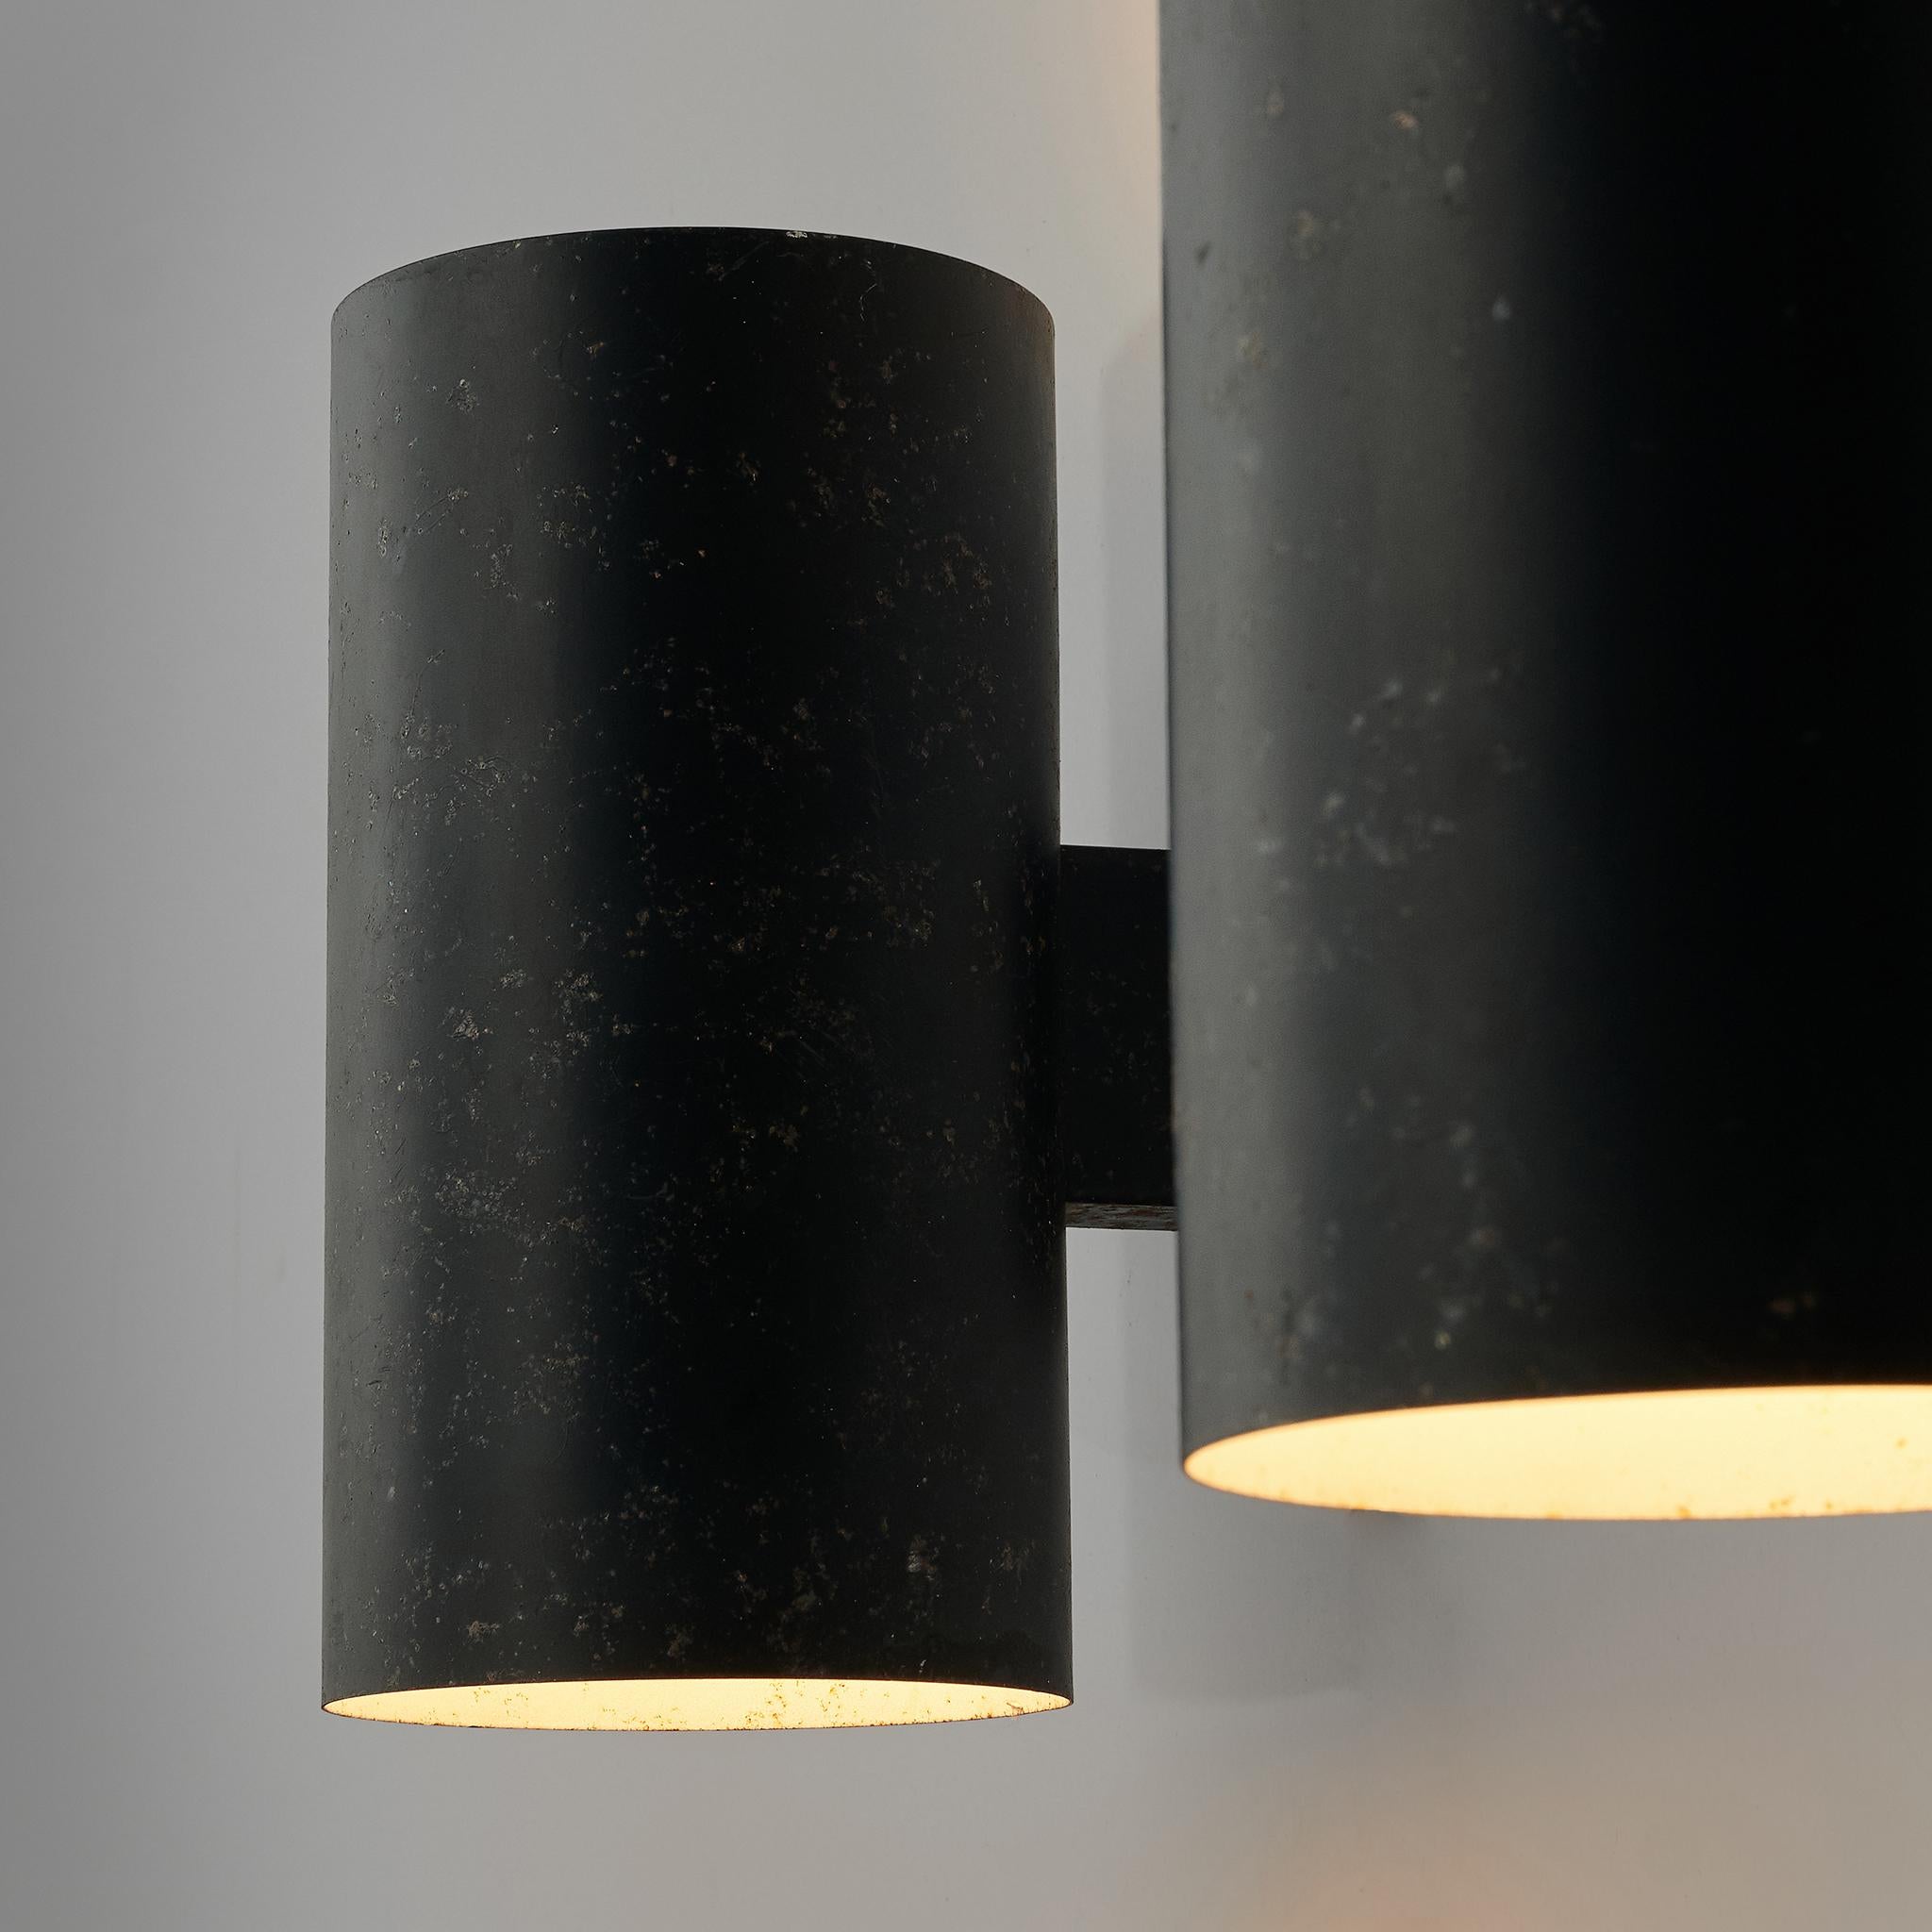 Louis Poulsen, wall lamps, lacquered metal, Denmark, 1950s. 

Wall lights by manufacturer Louis Poulsen. The lights have a strong simple shape. The blak metal cones have a beautiful patina. Because of the cylindrical shape of the lamp, and the